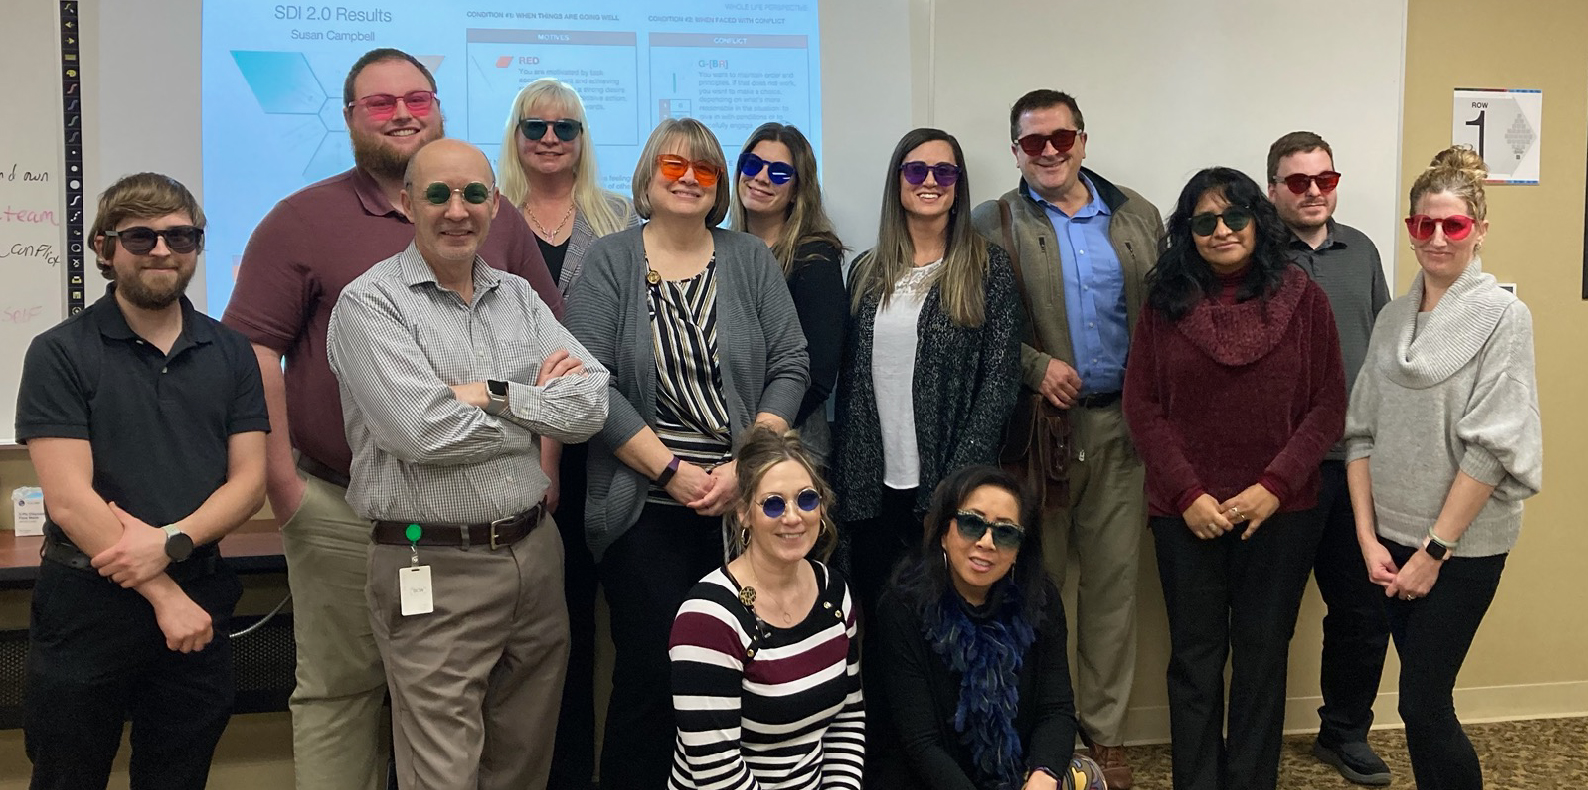 A group of male and female coworkers take a group photo wearing silly glasses following a training